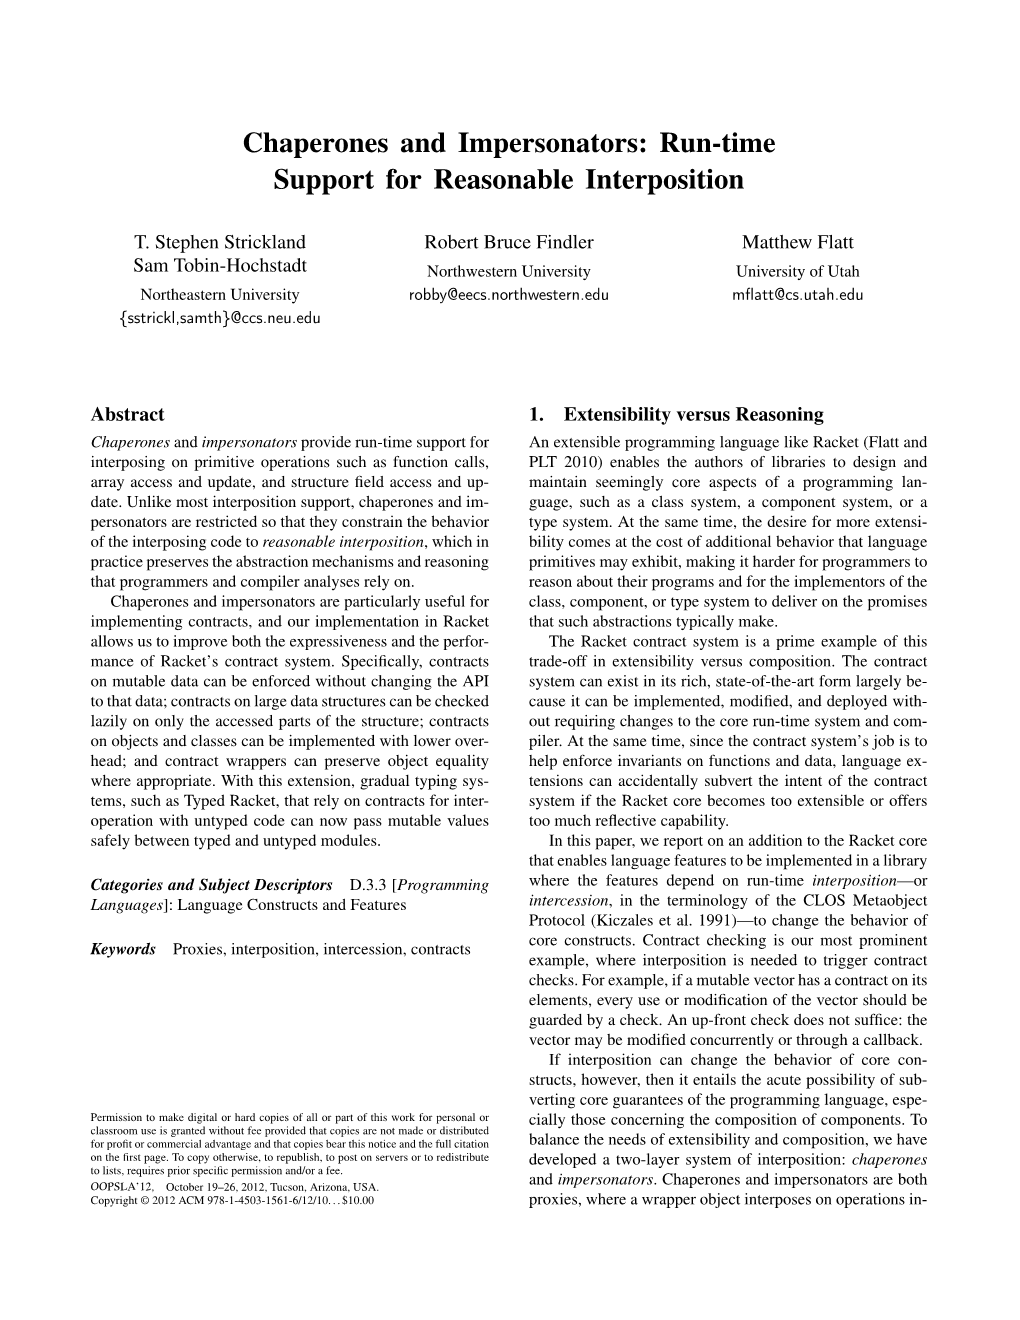 Chaperones and Impersonators: Run-Time Support for Reasonable Interposition